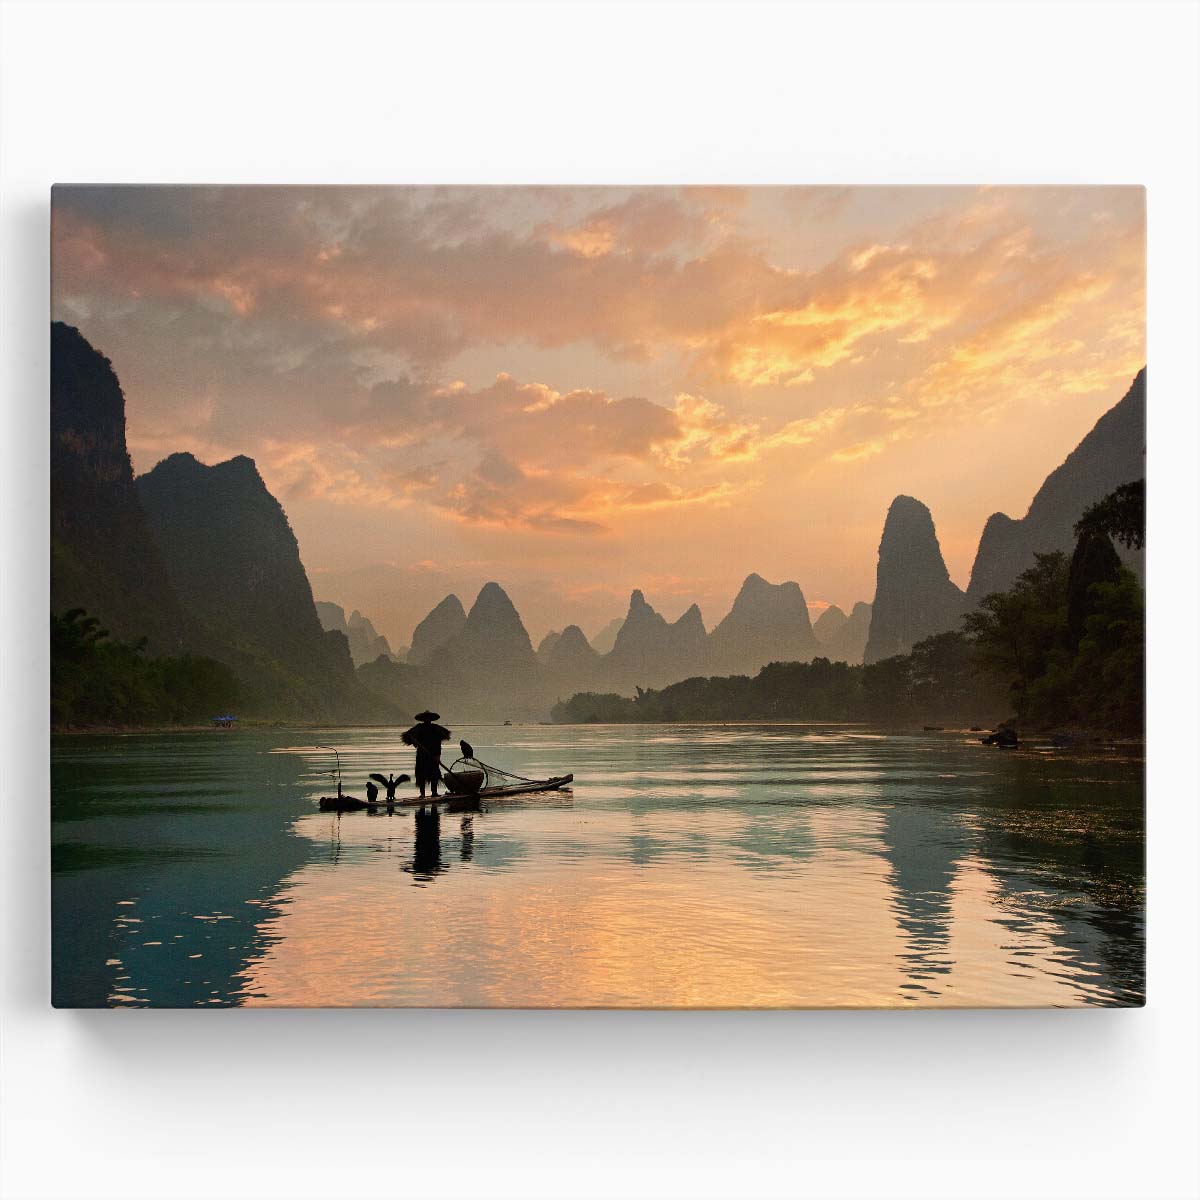 Golden Sunrise Li River Fishing Landscape Photography Wall Art by Luxuriance Designs. Made in USA.